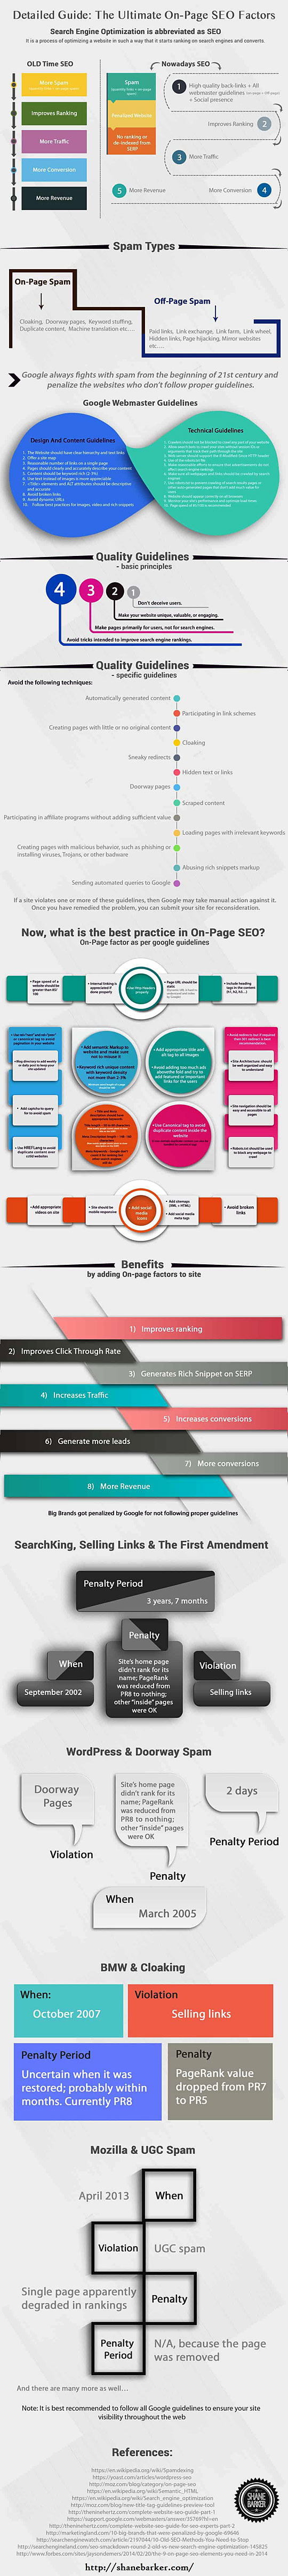 On-Page SEO Factors Infographic